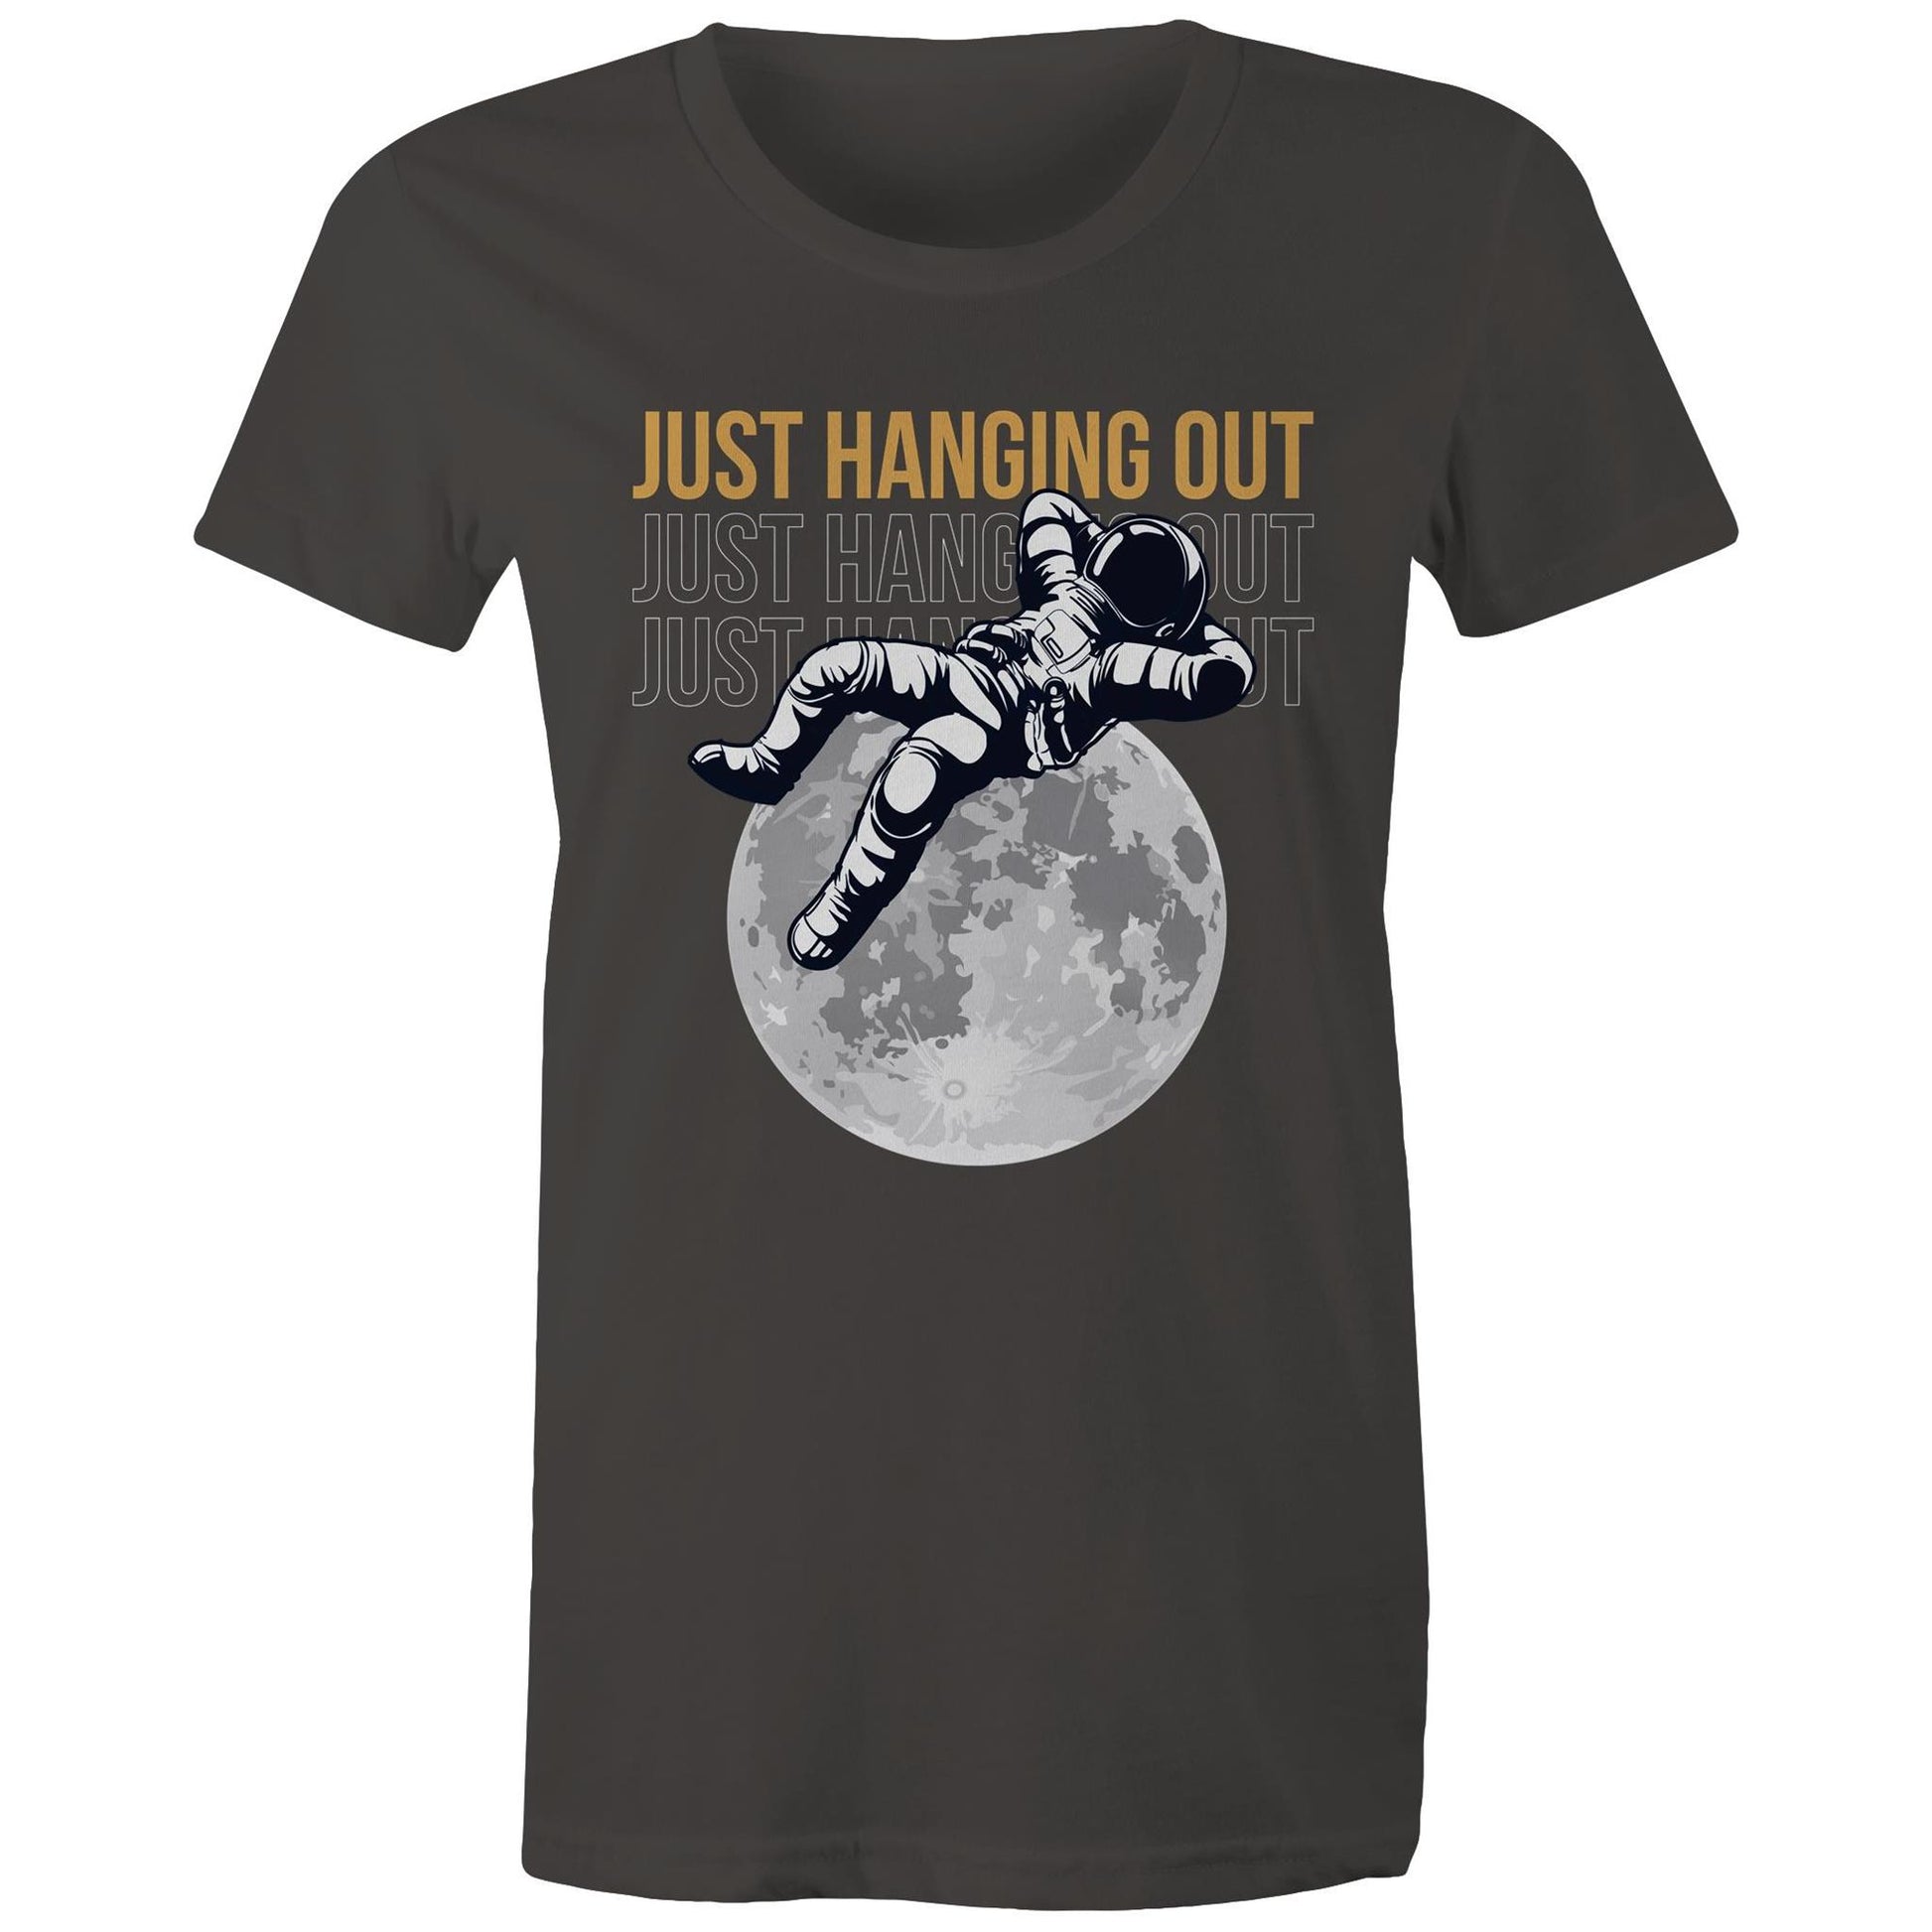 Just Hanging Out - Womens T-shirt Charcoal Womens T-shirt Space